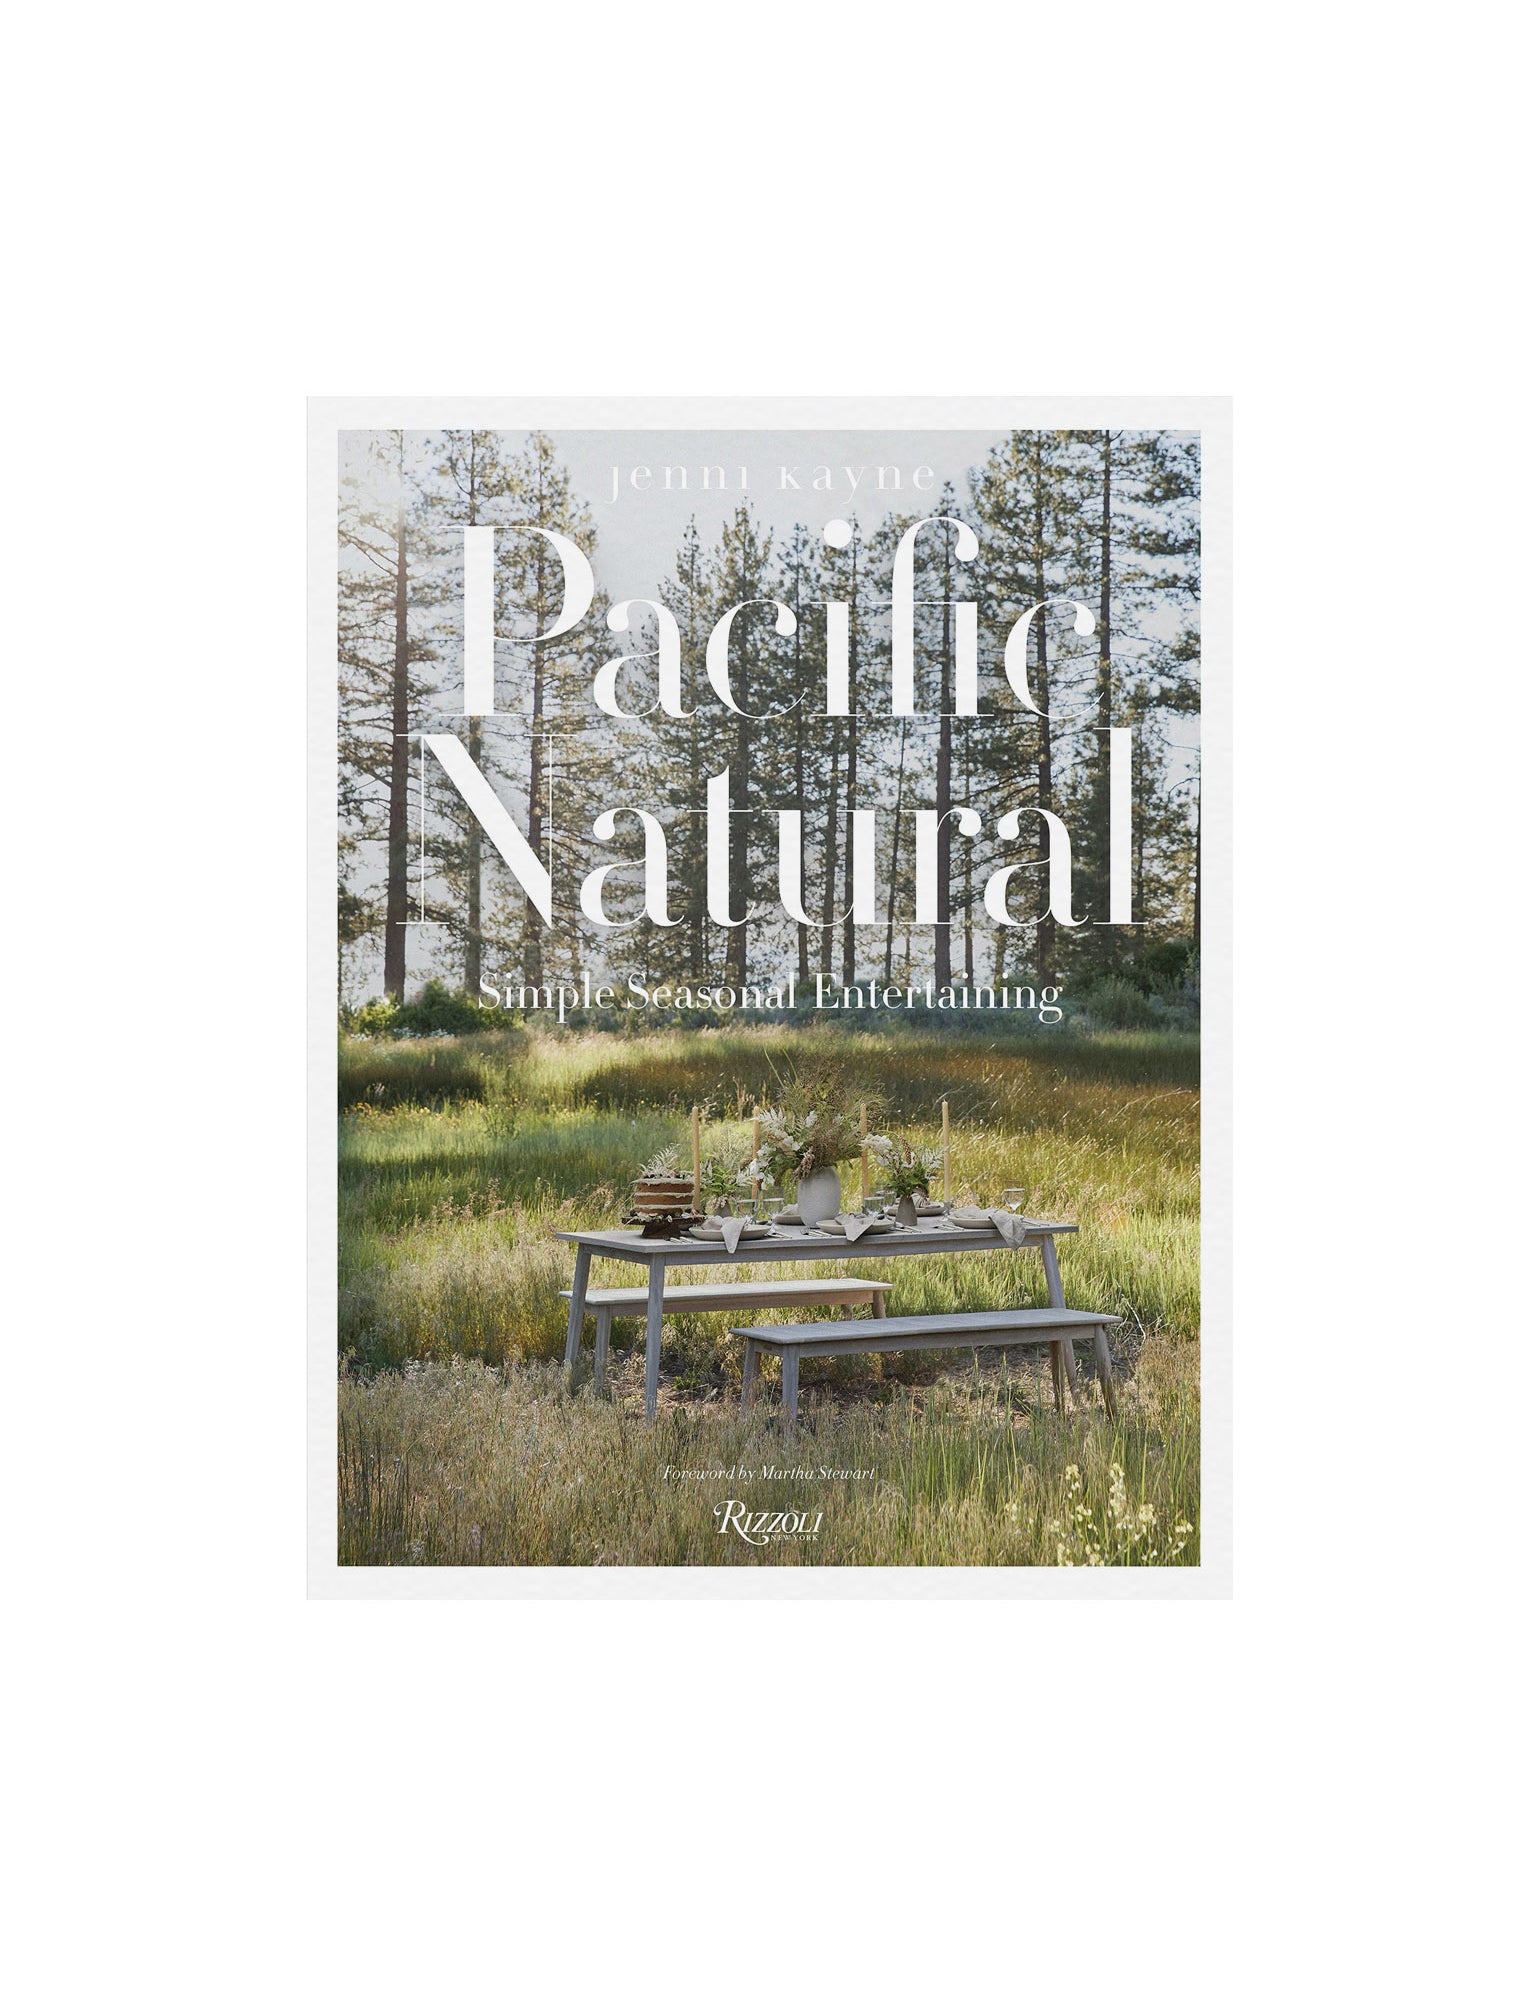 Pacific Natural